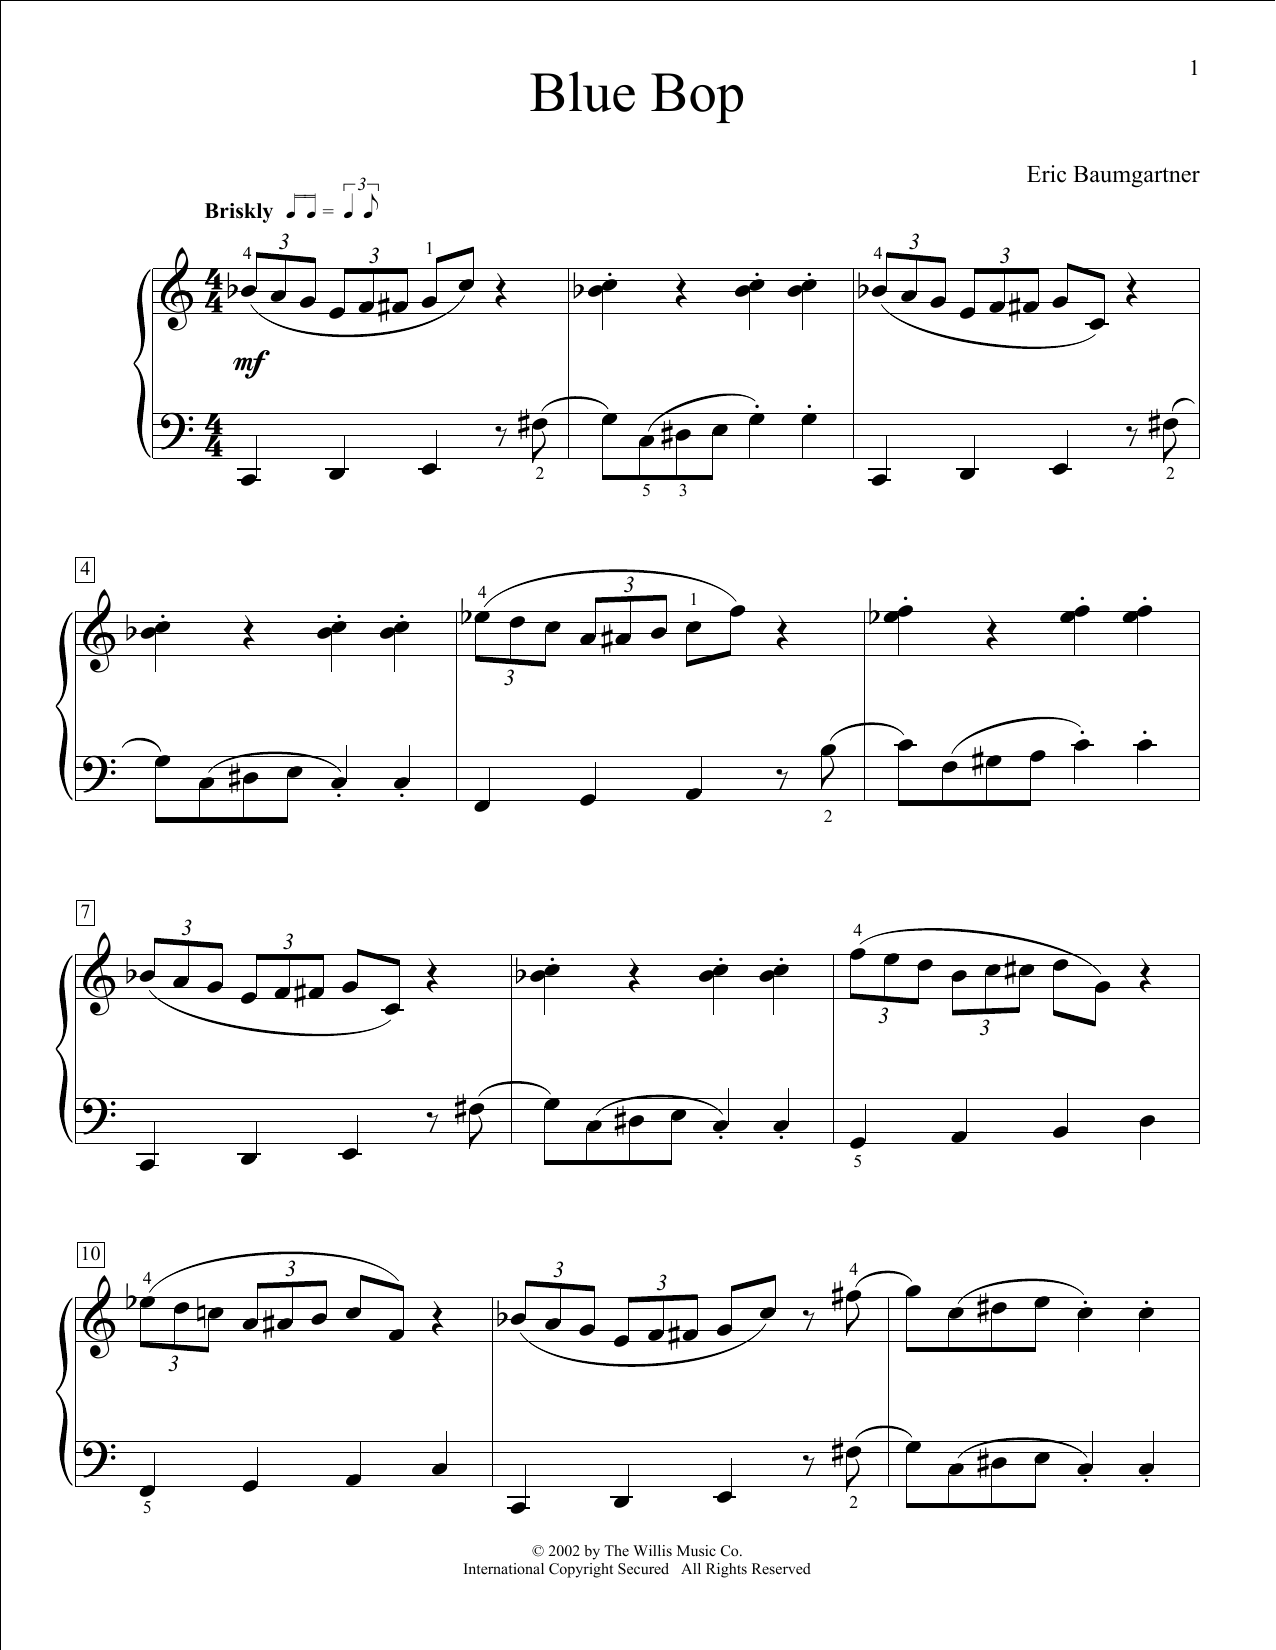 Eric Baumgartner Blue Bop sheet music preview music notes and score for Educational Piano including 2 page(s)